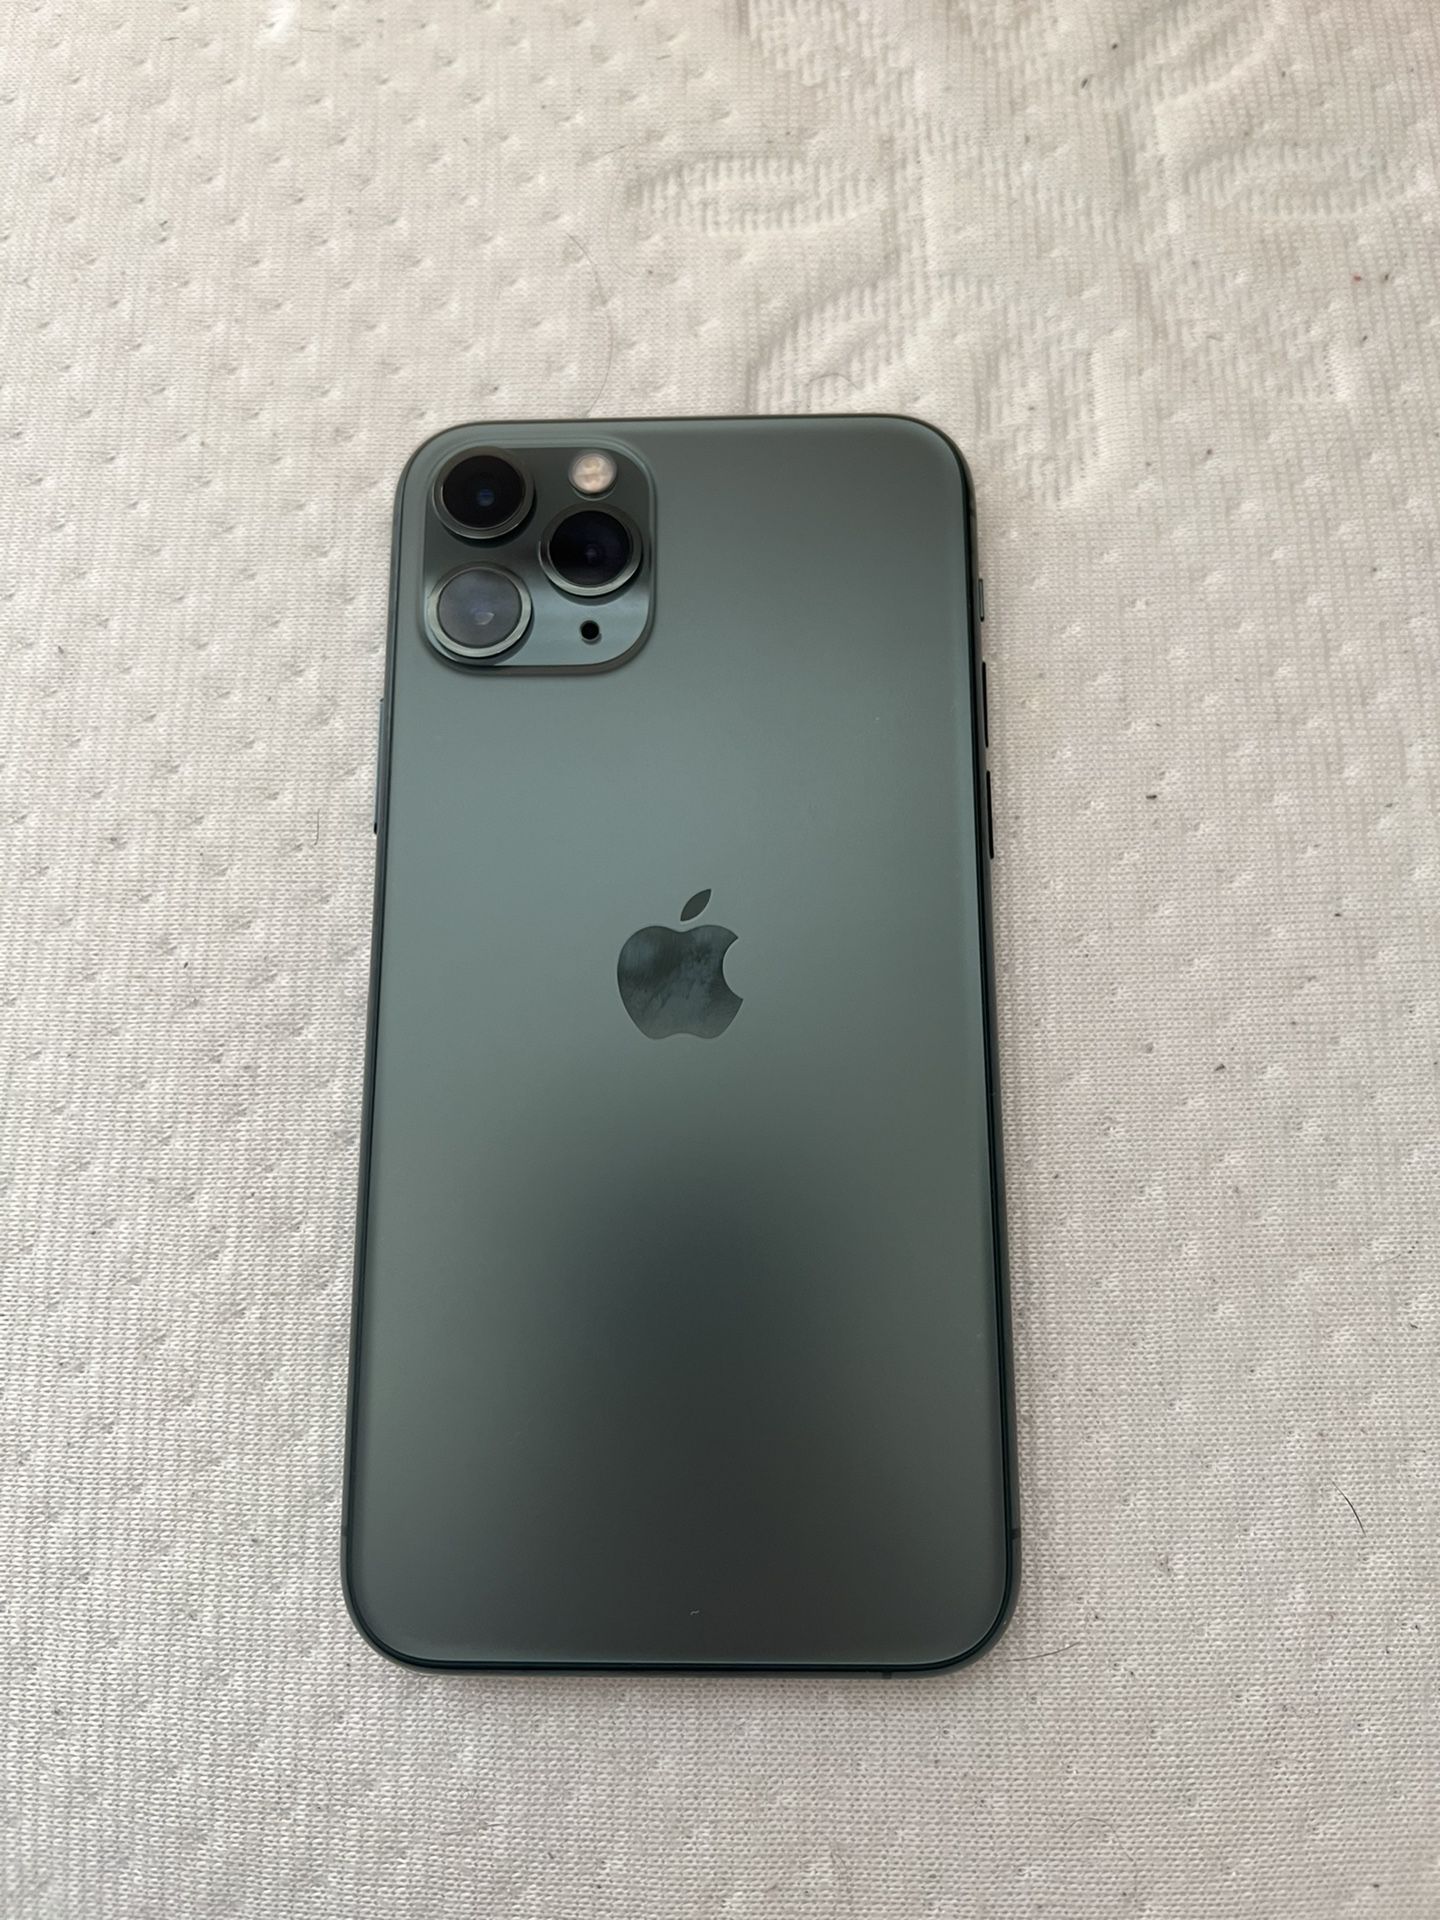 iPhone 11 Pro with case